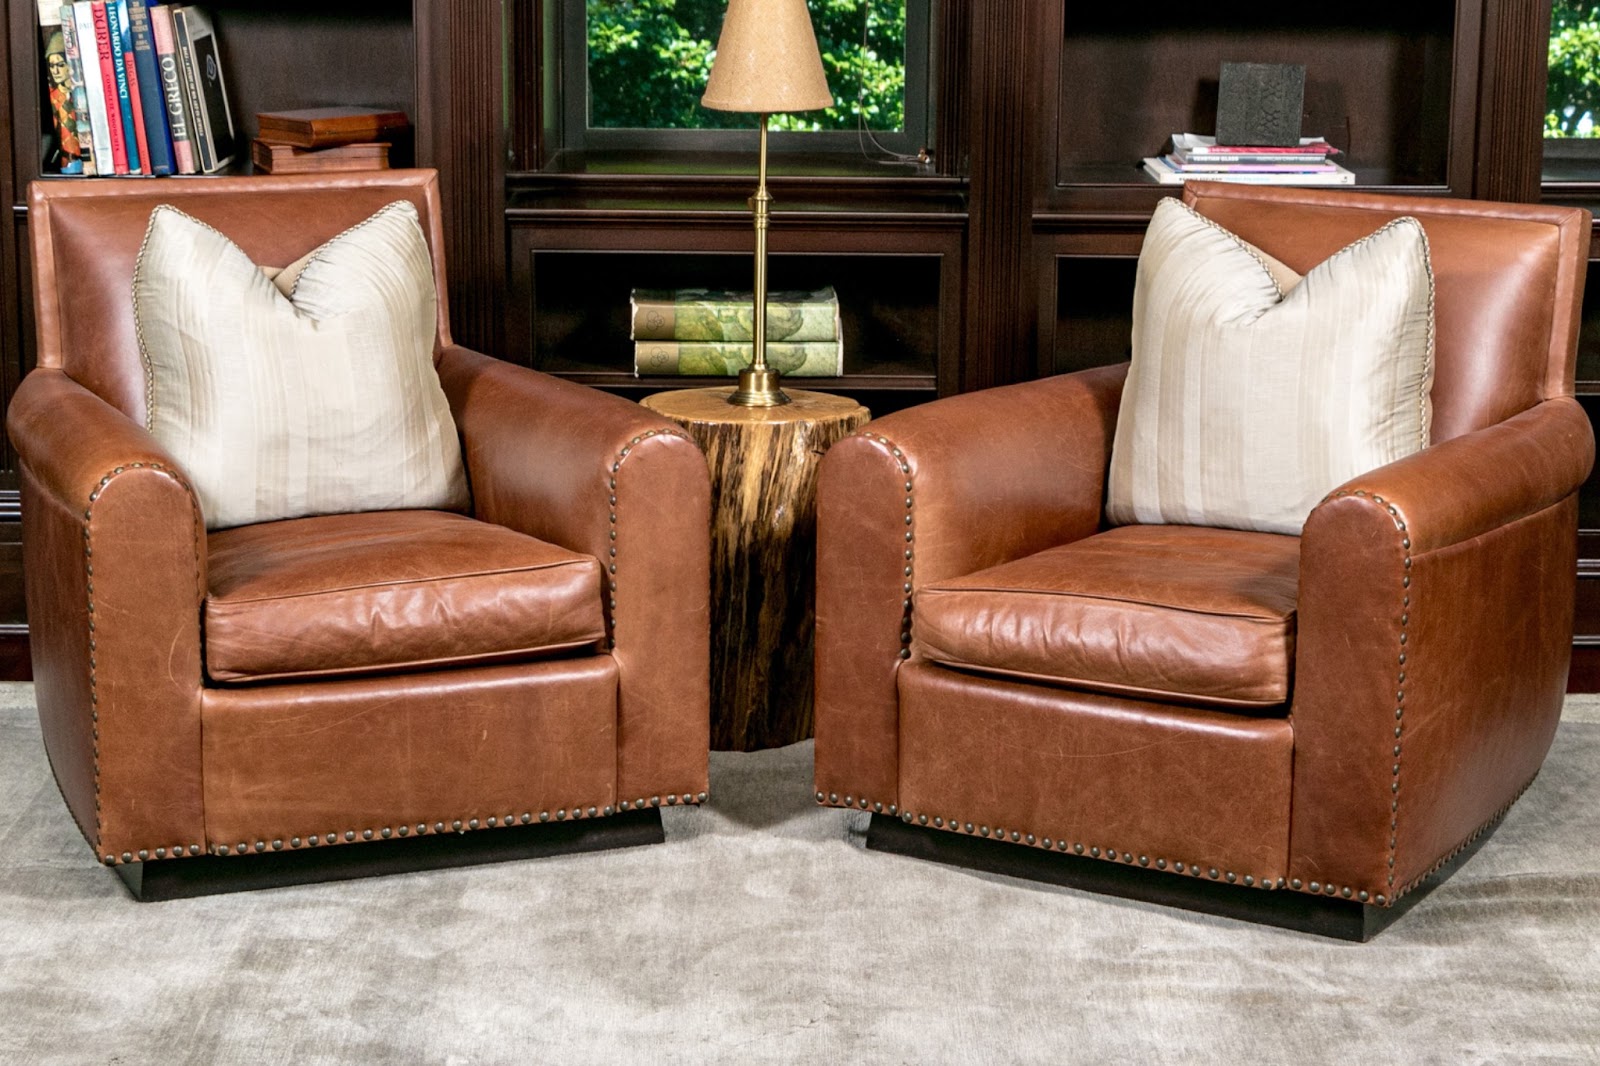 A pair of chocolate leather club chairs by Ralph Lauren in a moody library study.